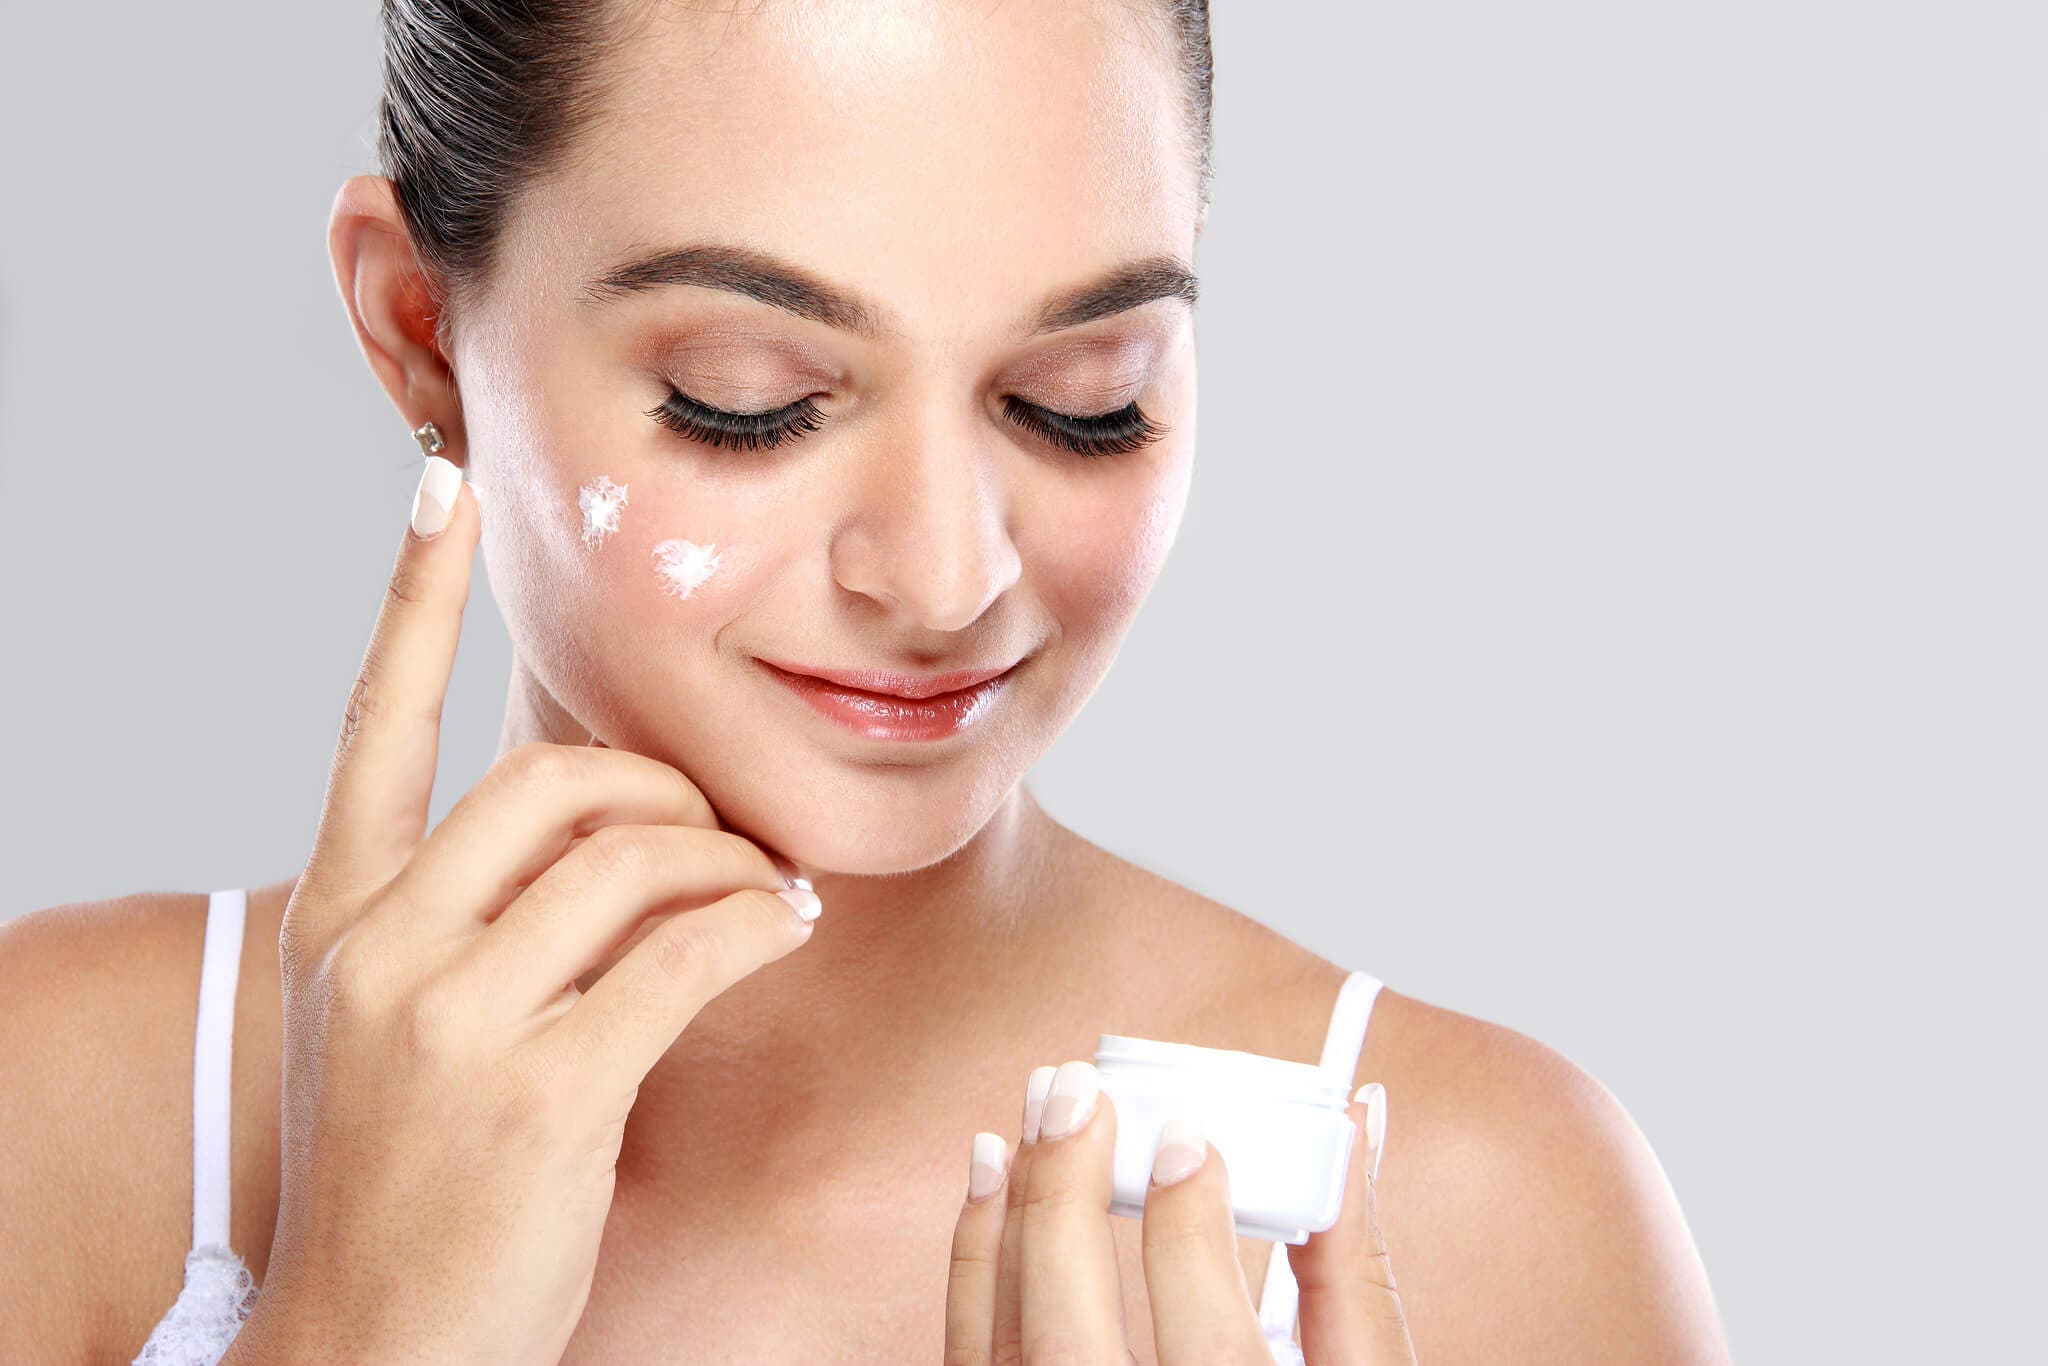 7 common misconceptions about skin care #1